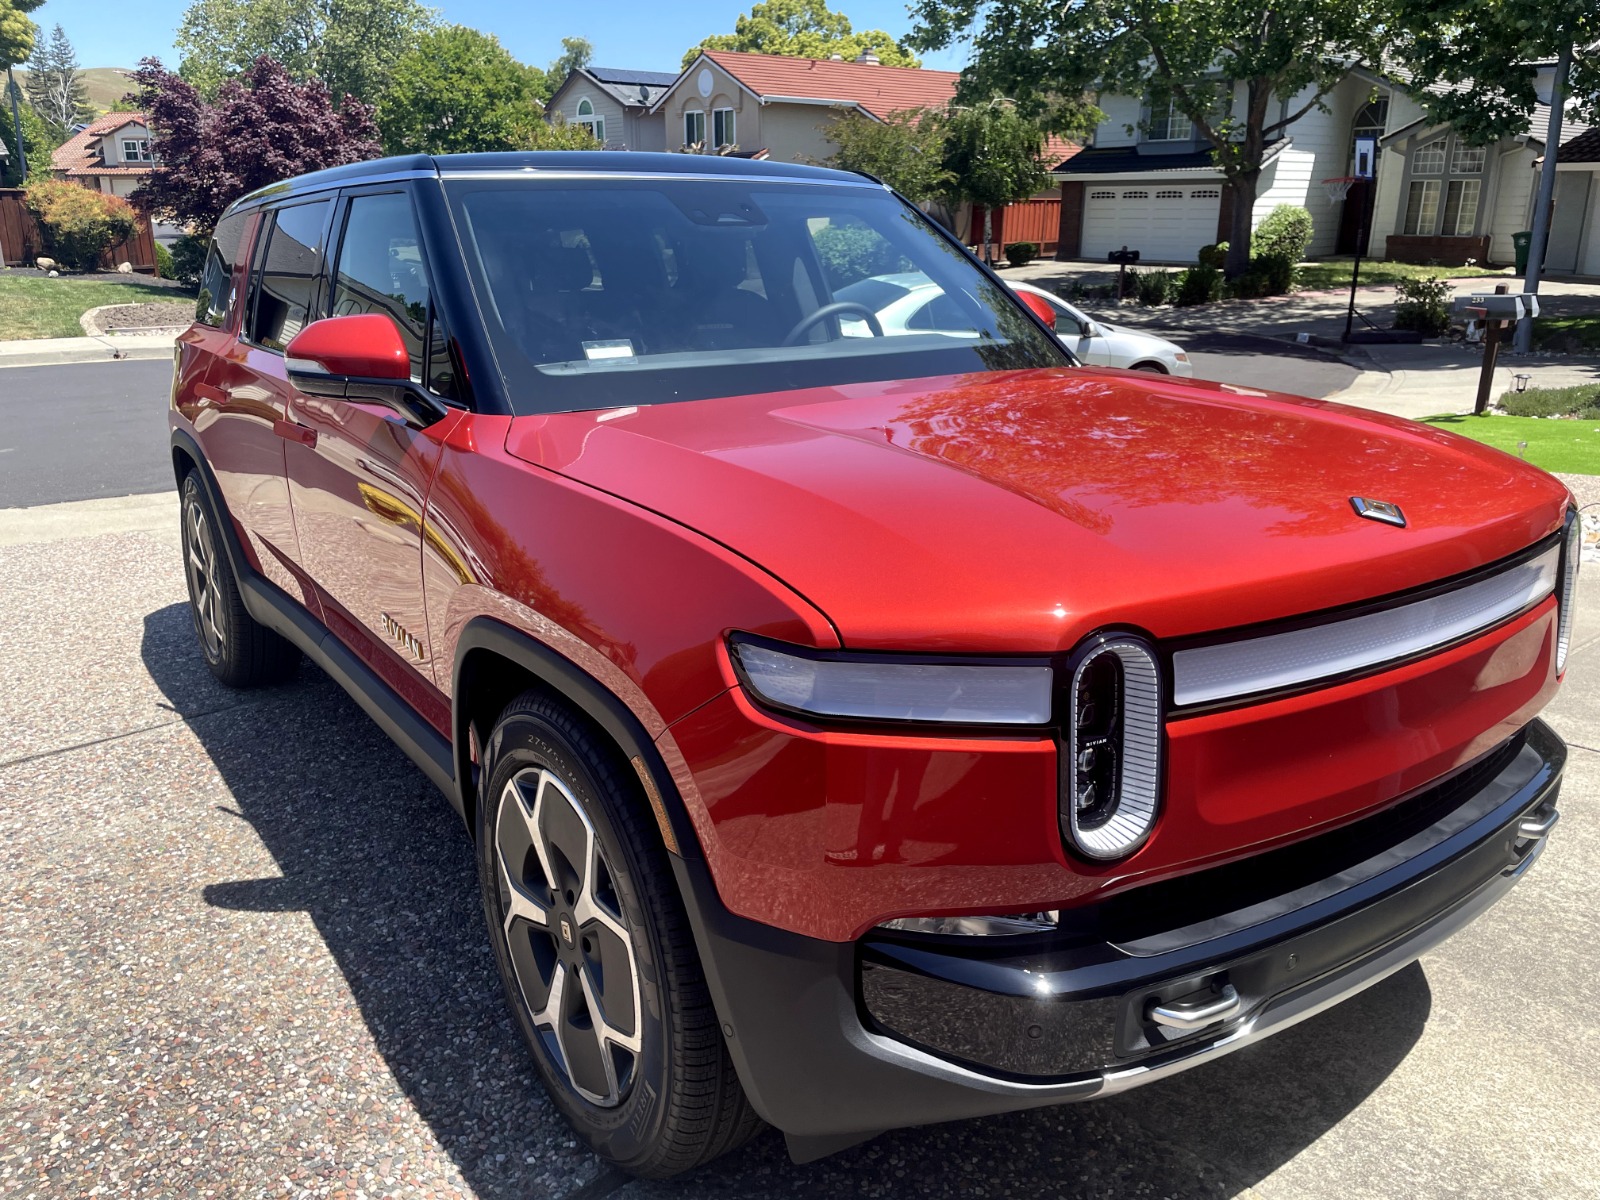 2023 Rivian R1S Adventure Find My Electric